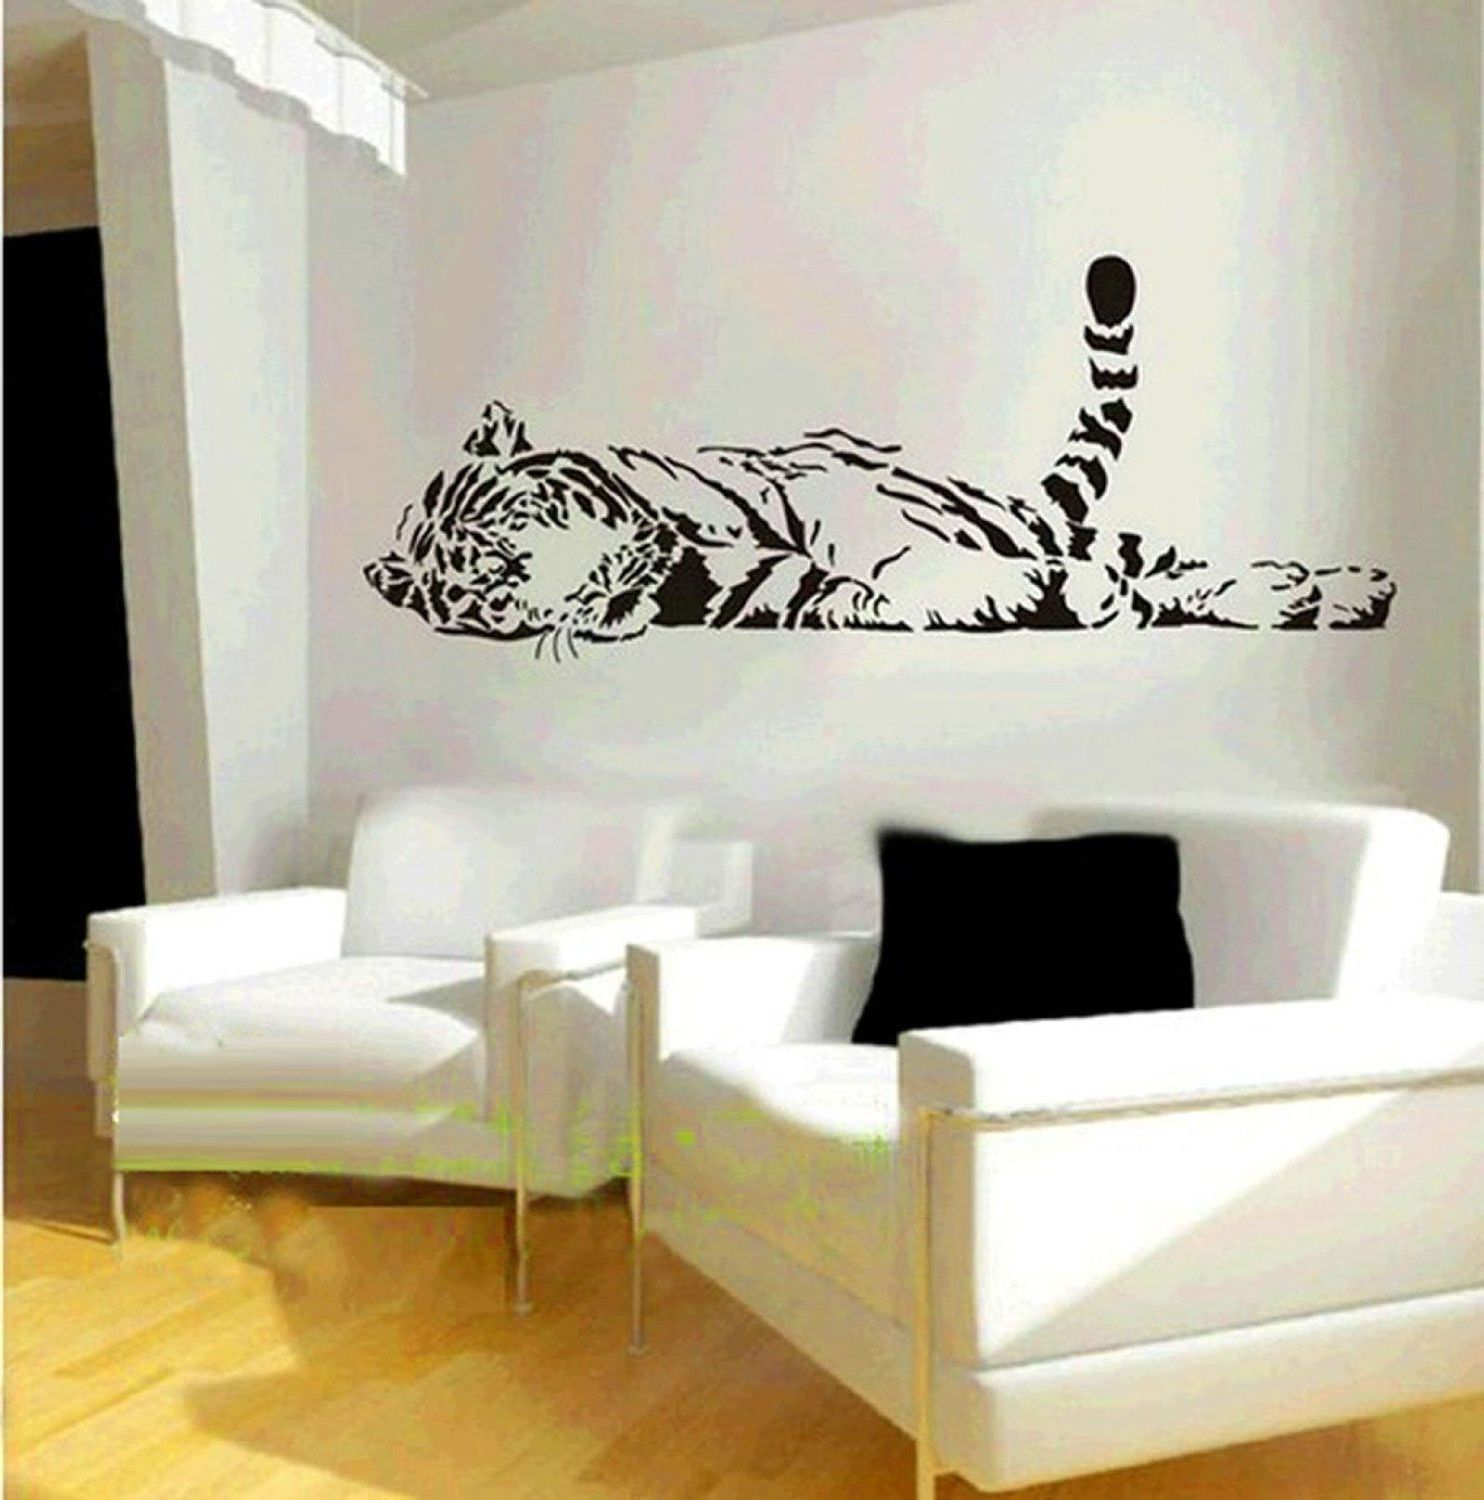 Favorite Removable Wall Accents Regarding Amazon: Animal Wild Zoo Lying Tail Up Tiger Wall Decal Sticker (View 10 of 15)